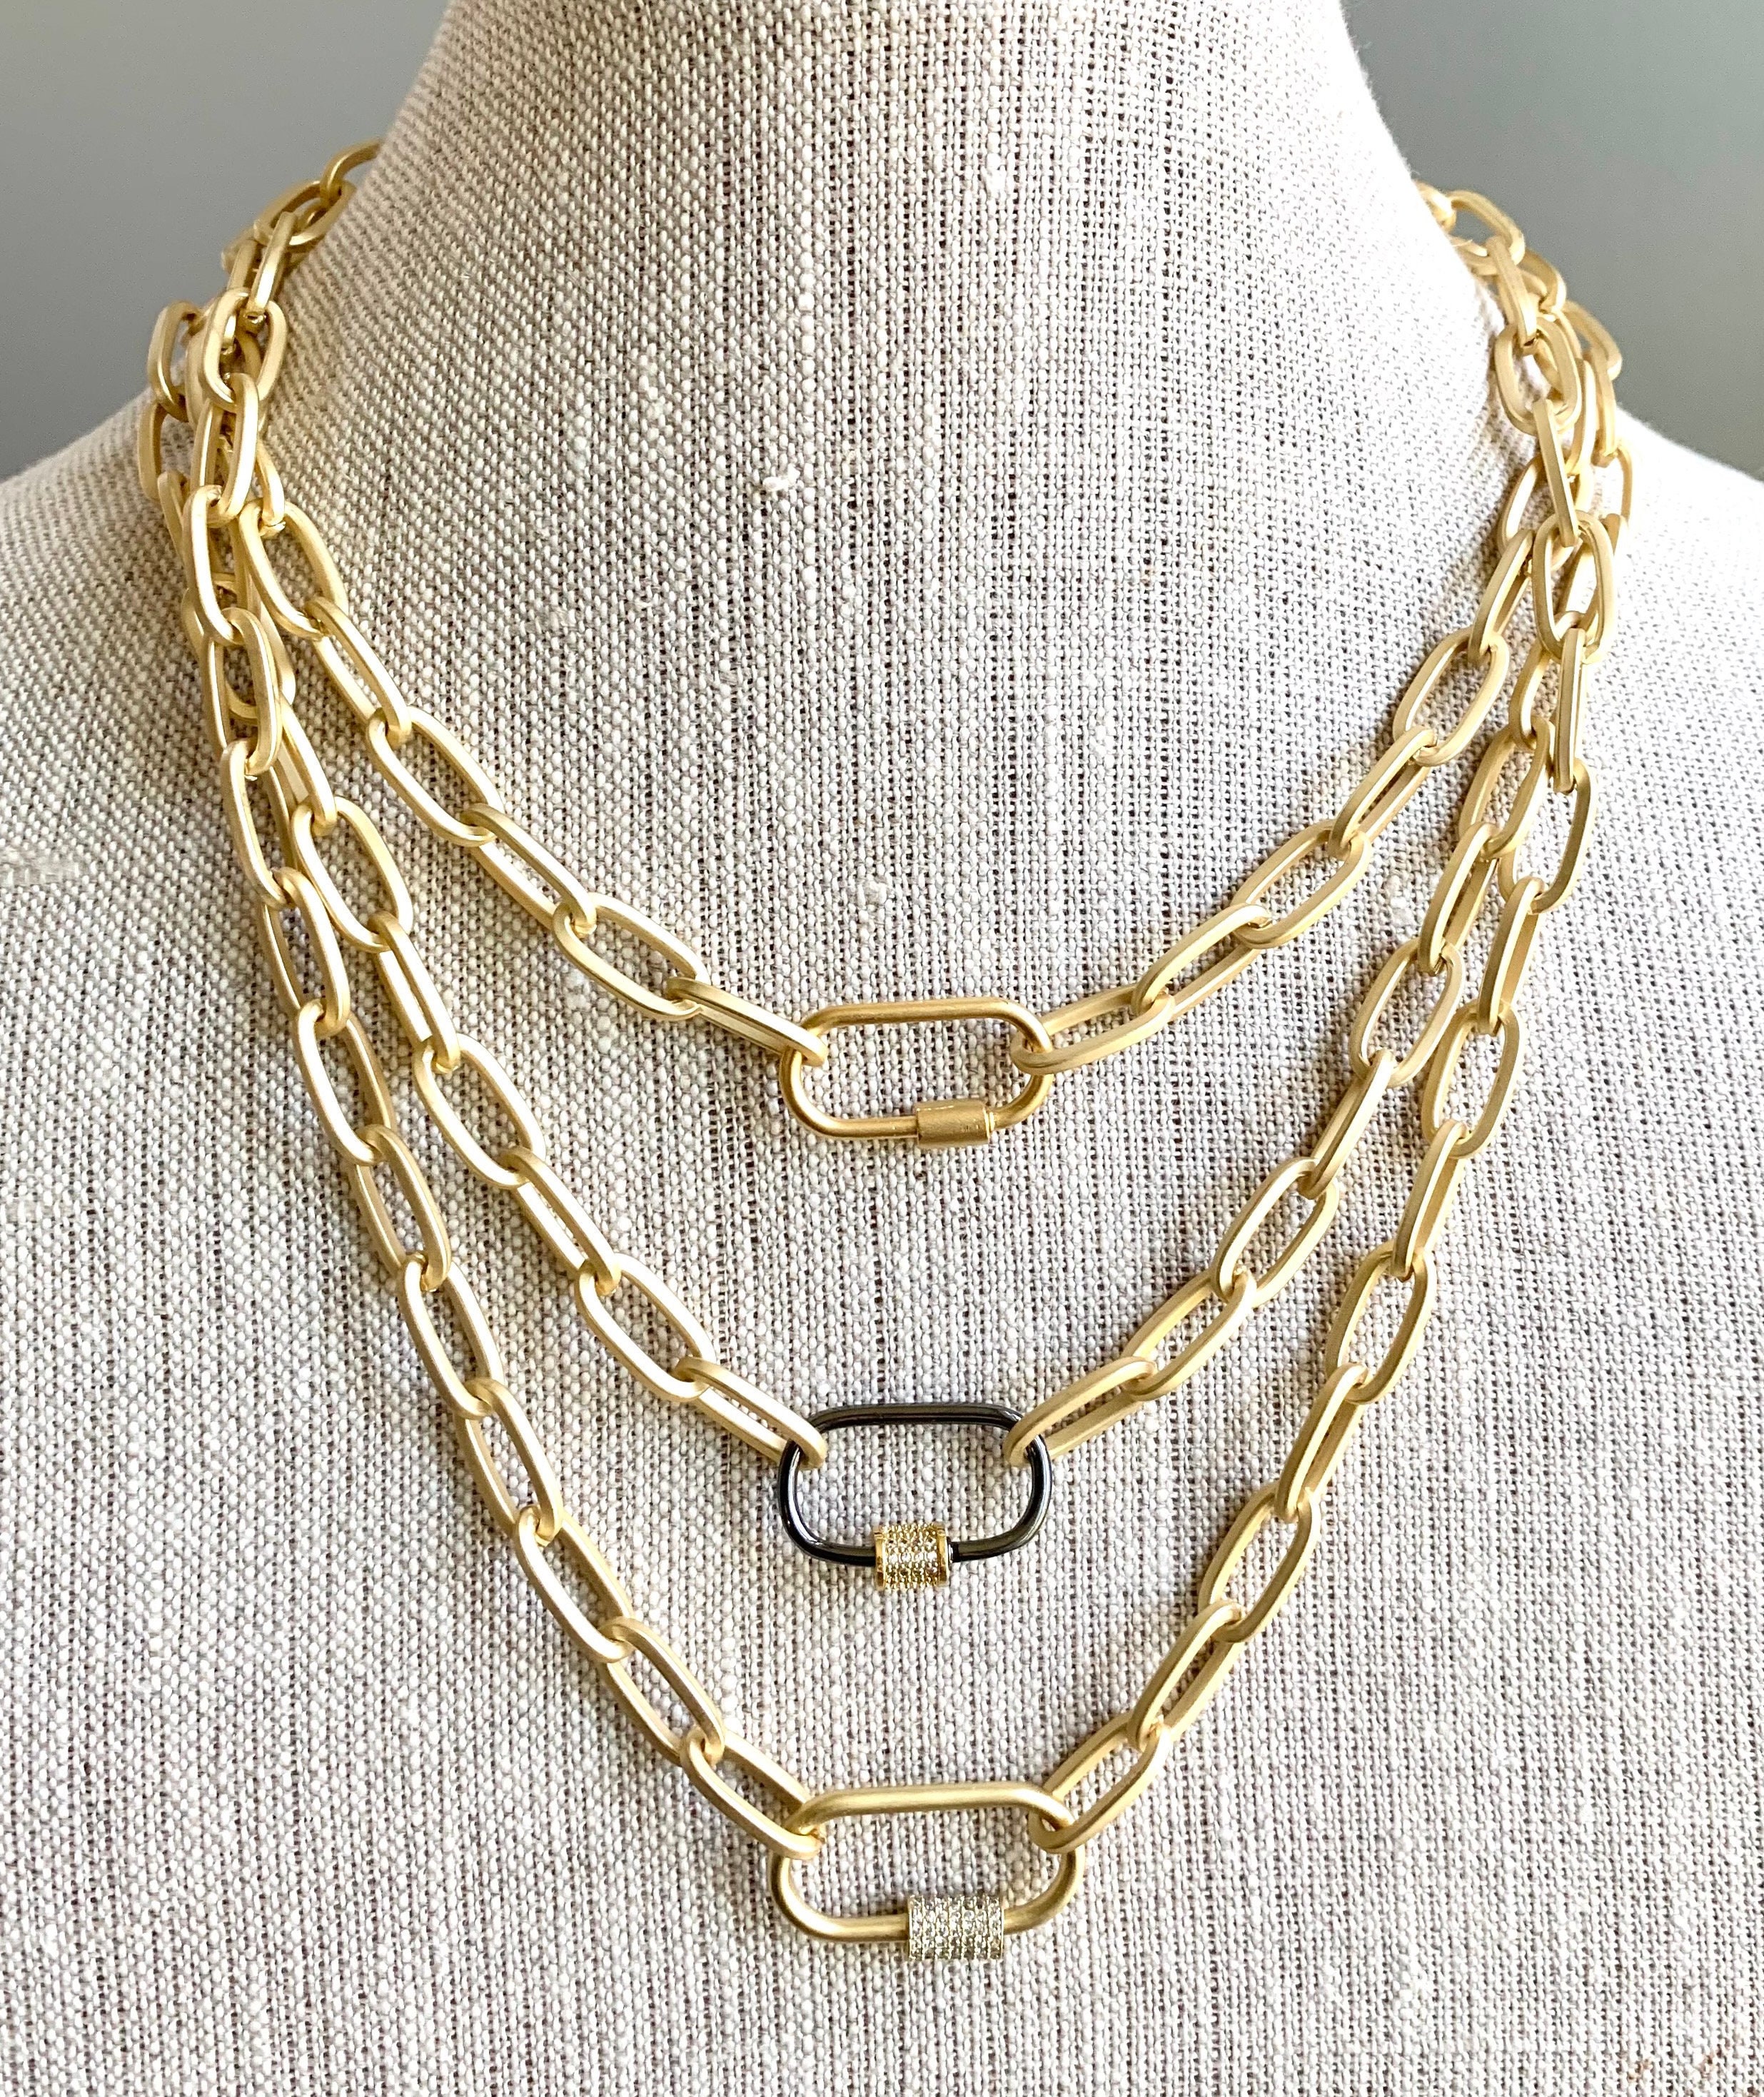 Layered Necklace Clasp, Detangler Gold Plated / Corrugated -4 Strand